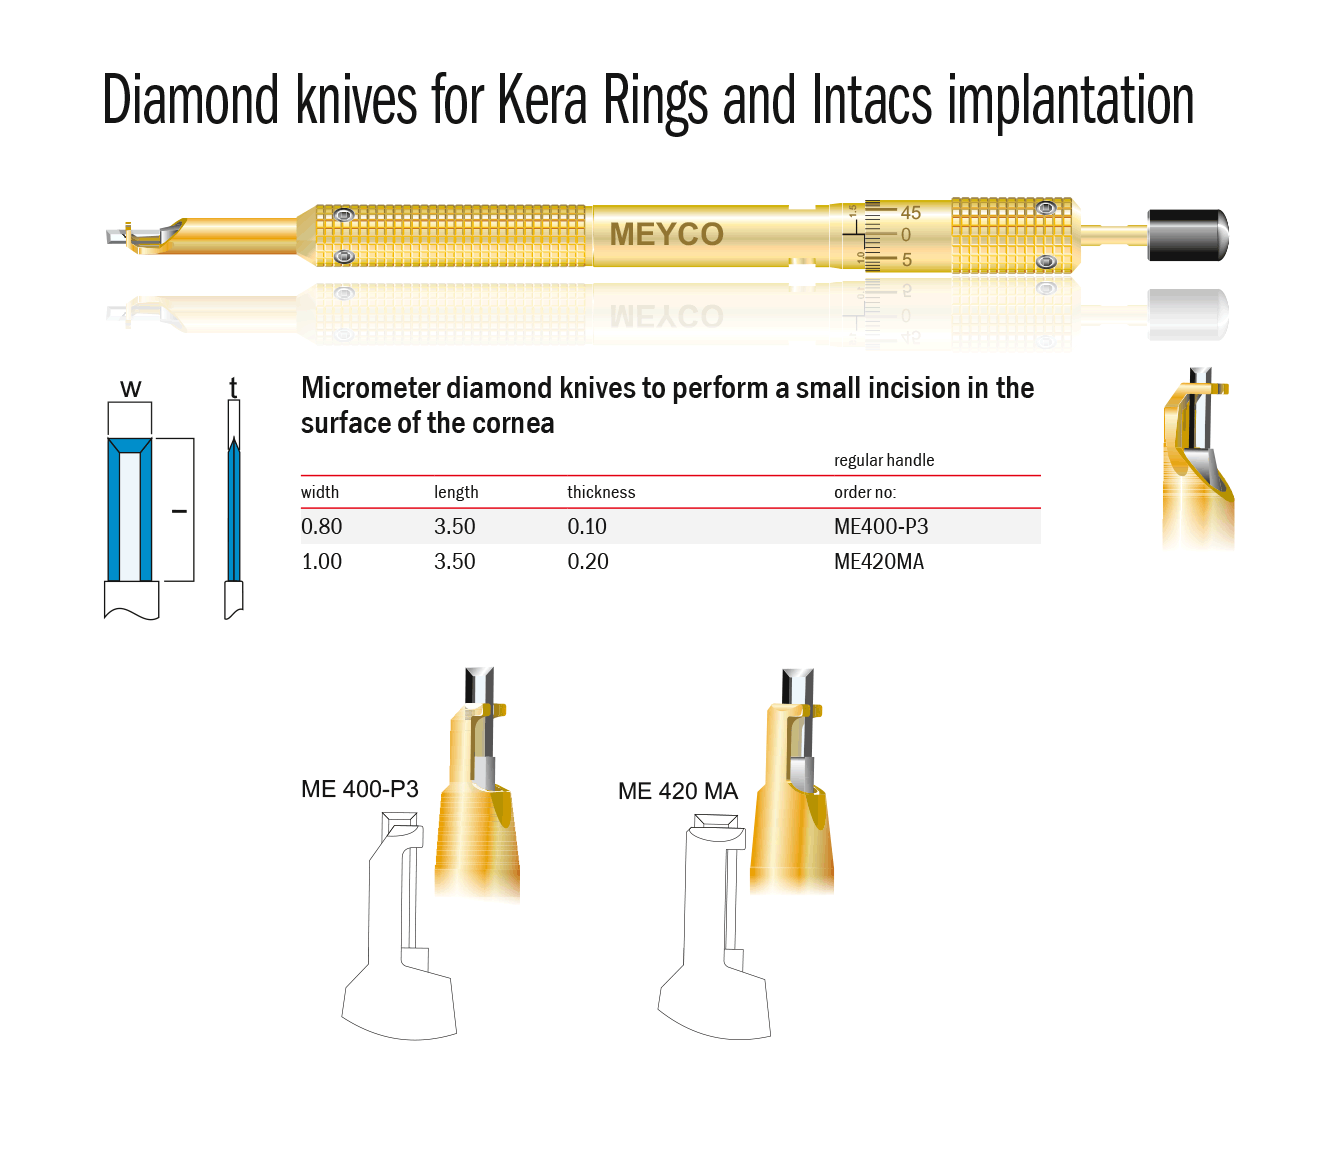 Diamond knives for Kera Rings and Intacts implantation